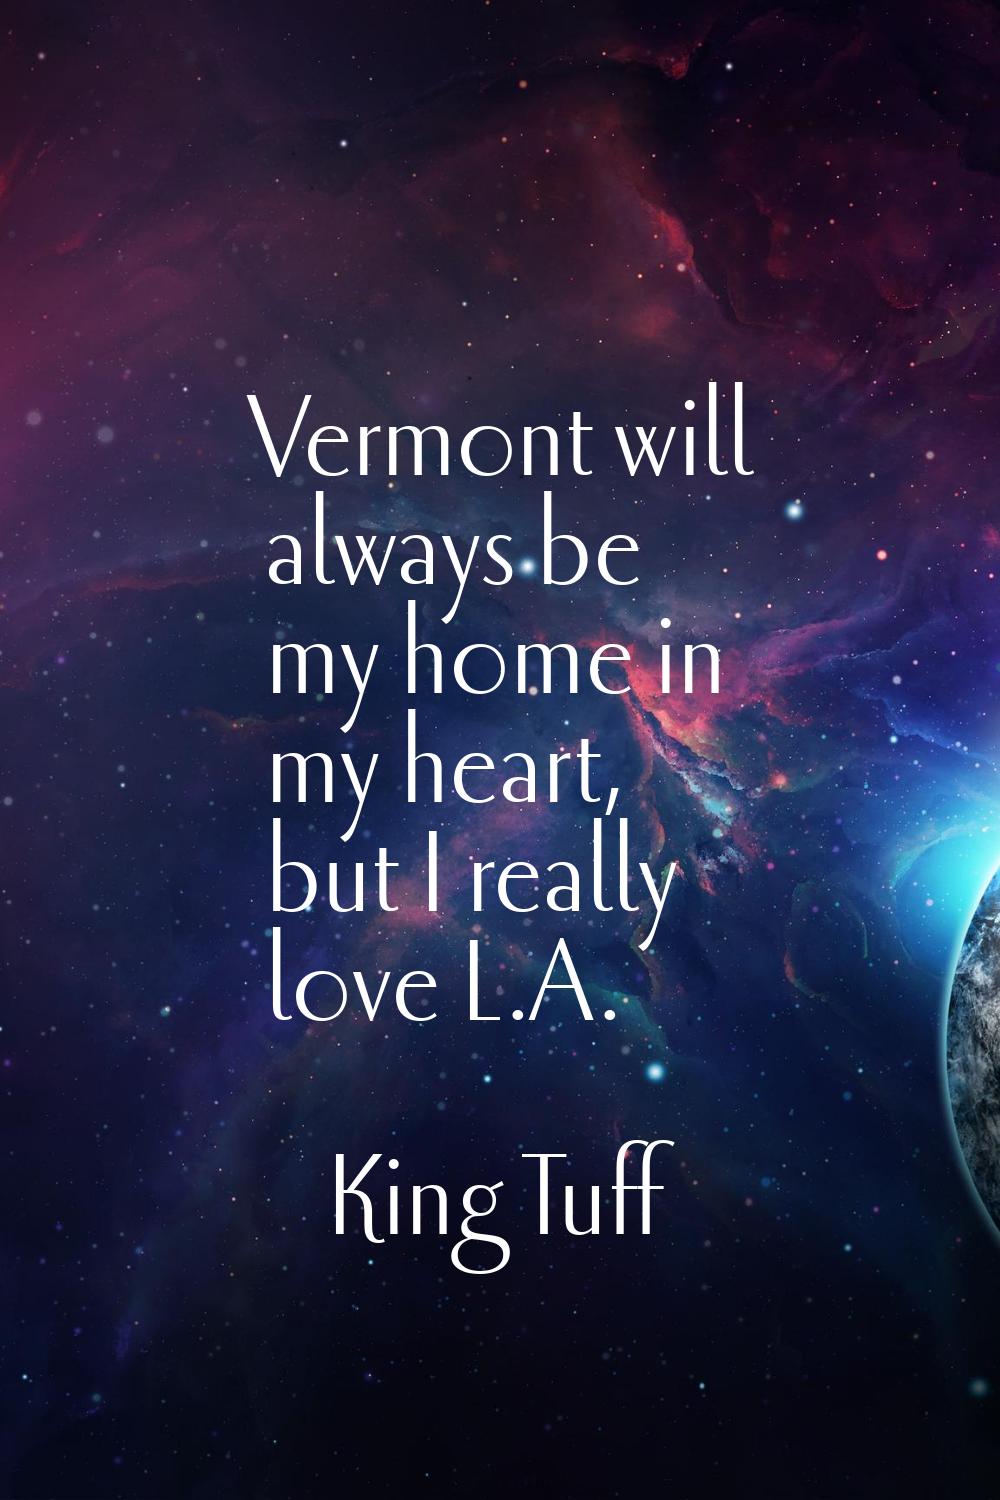 Vermont will always be my home in my heart, but I really love L.A.